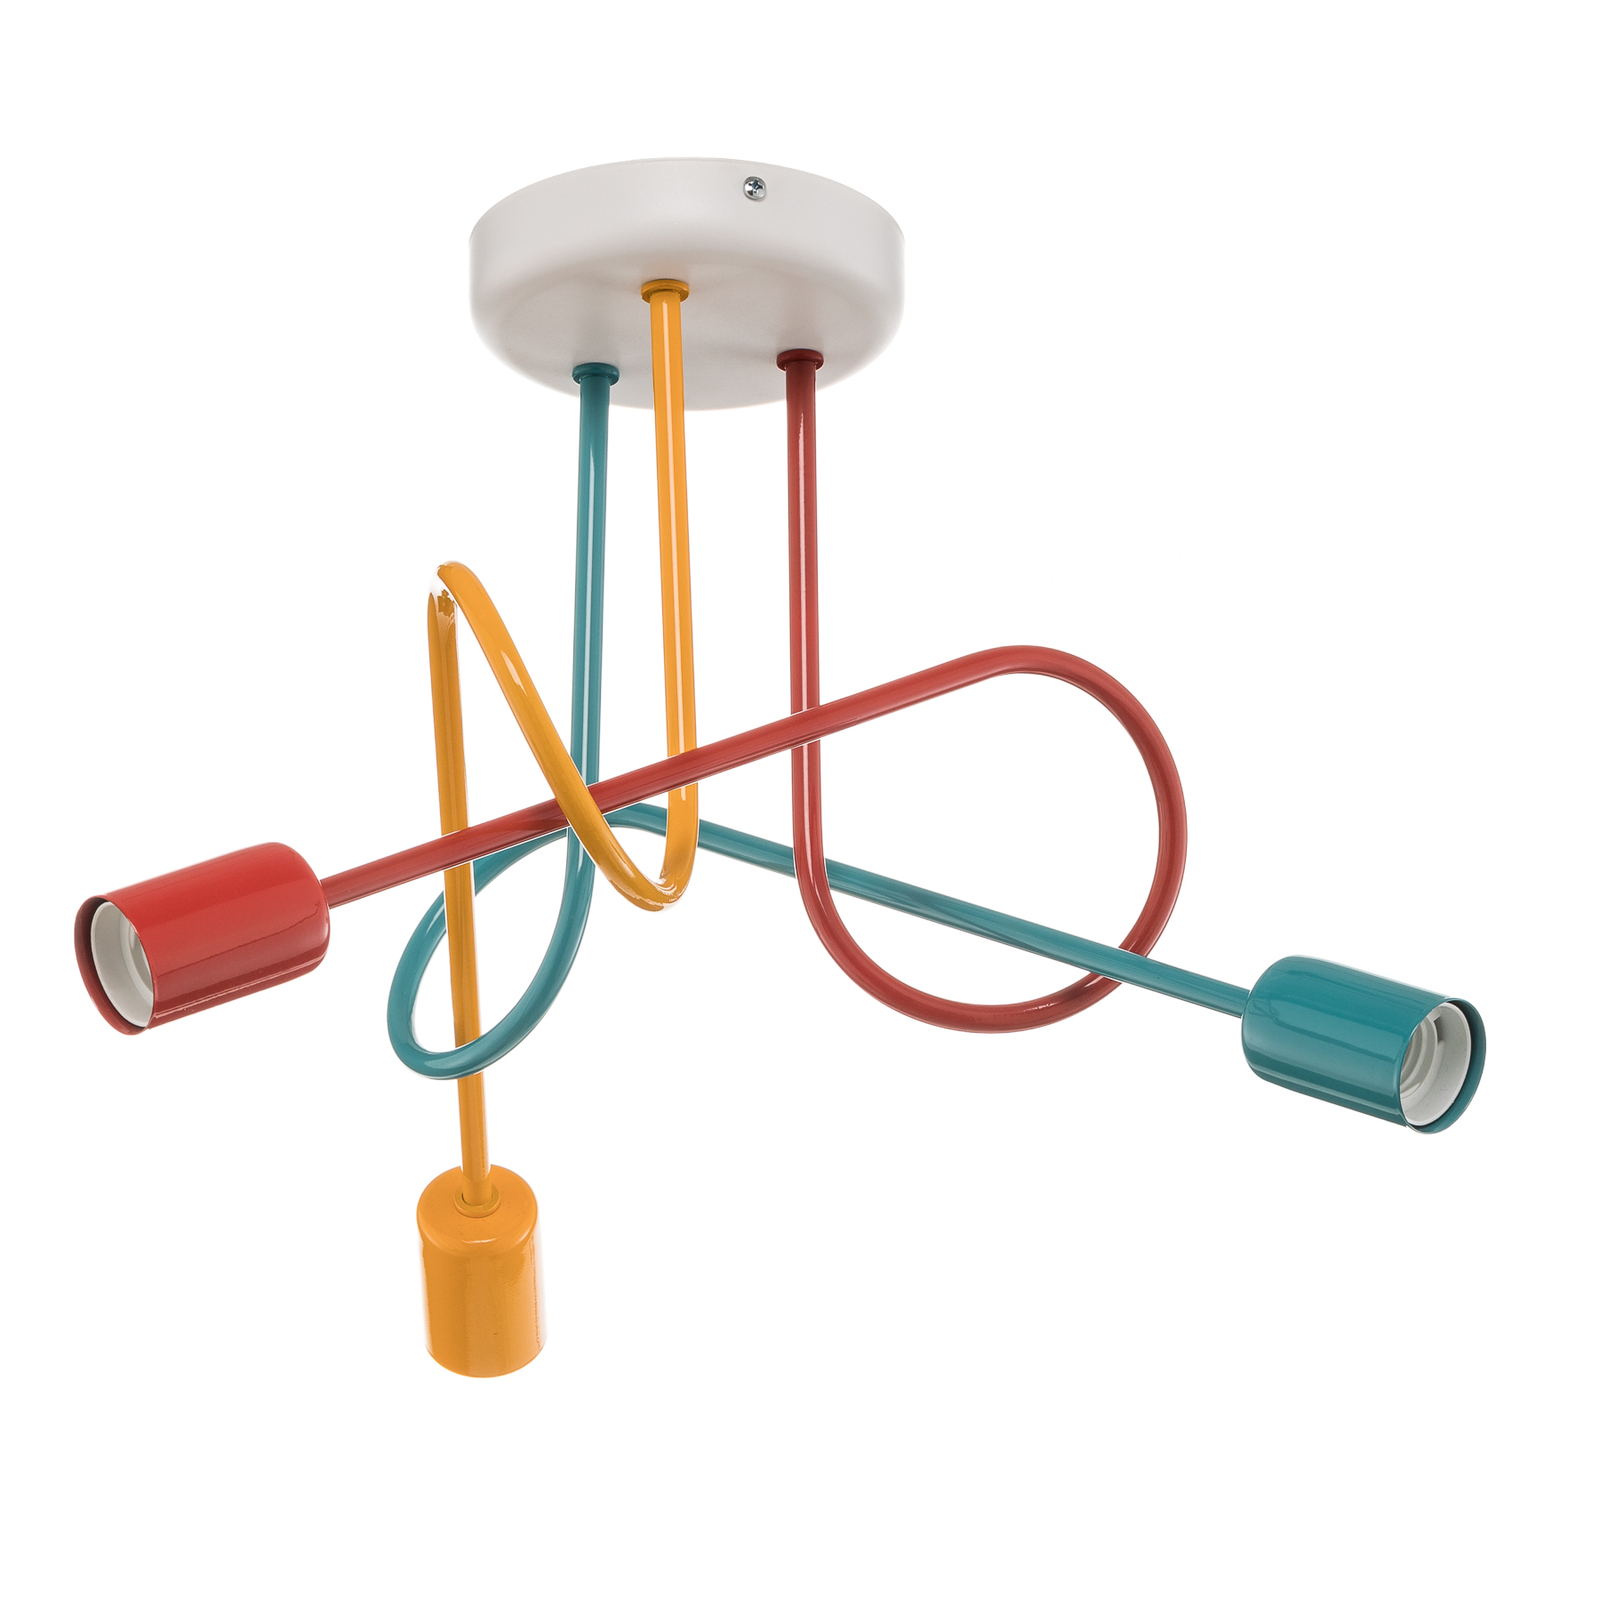 Oxford 3-bulb ceiling lamp orange/red/turquoise